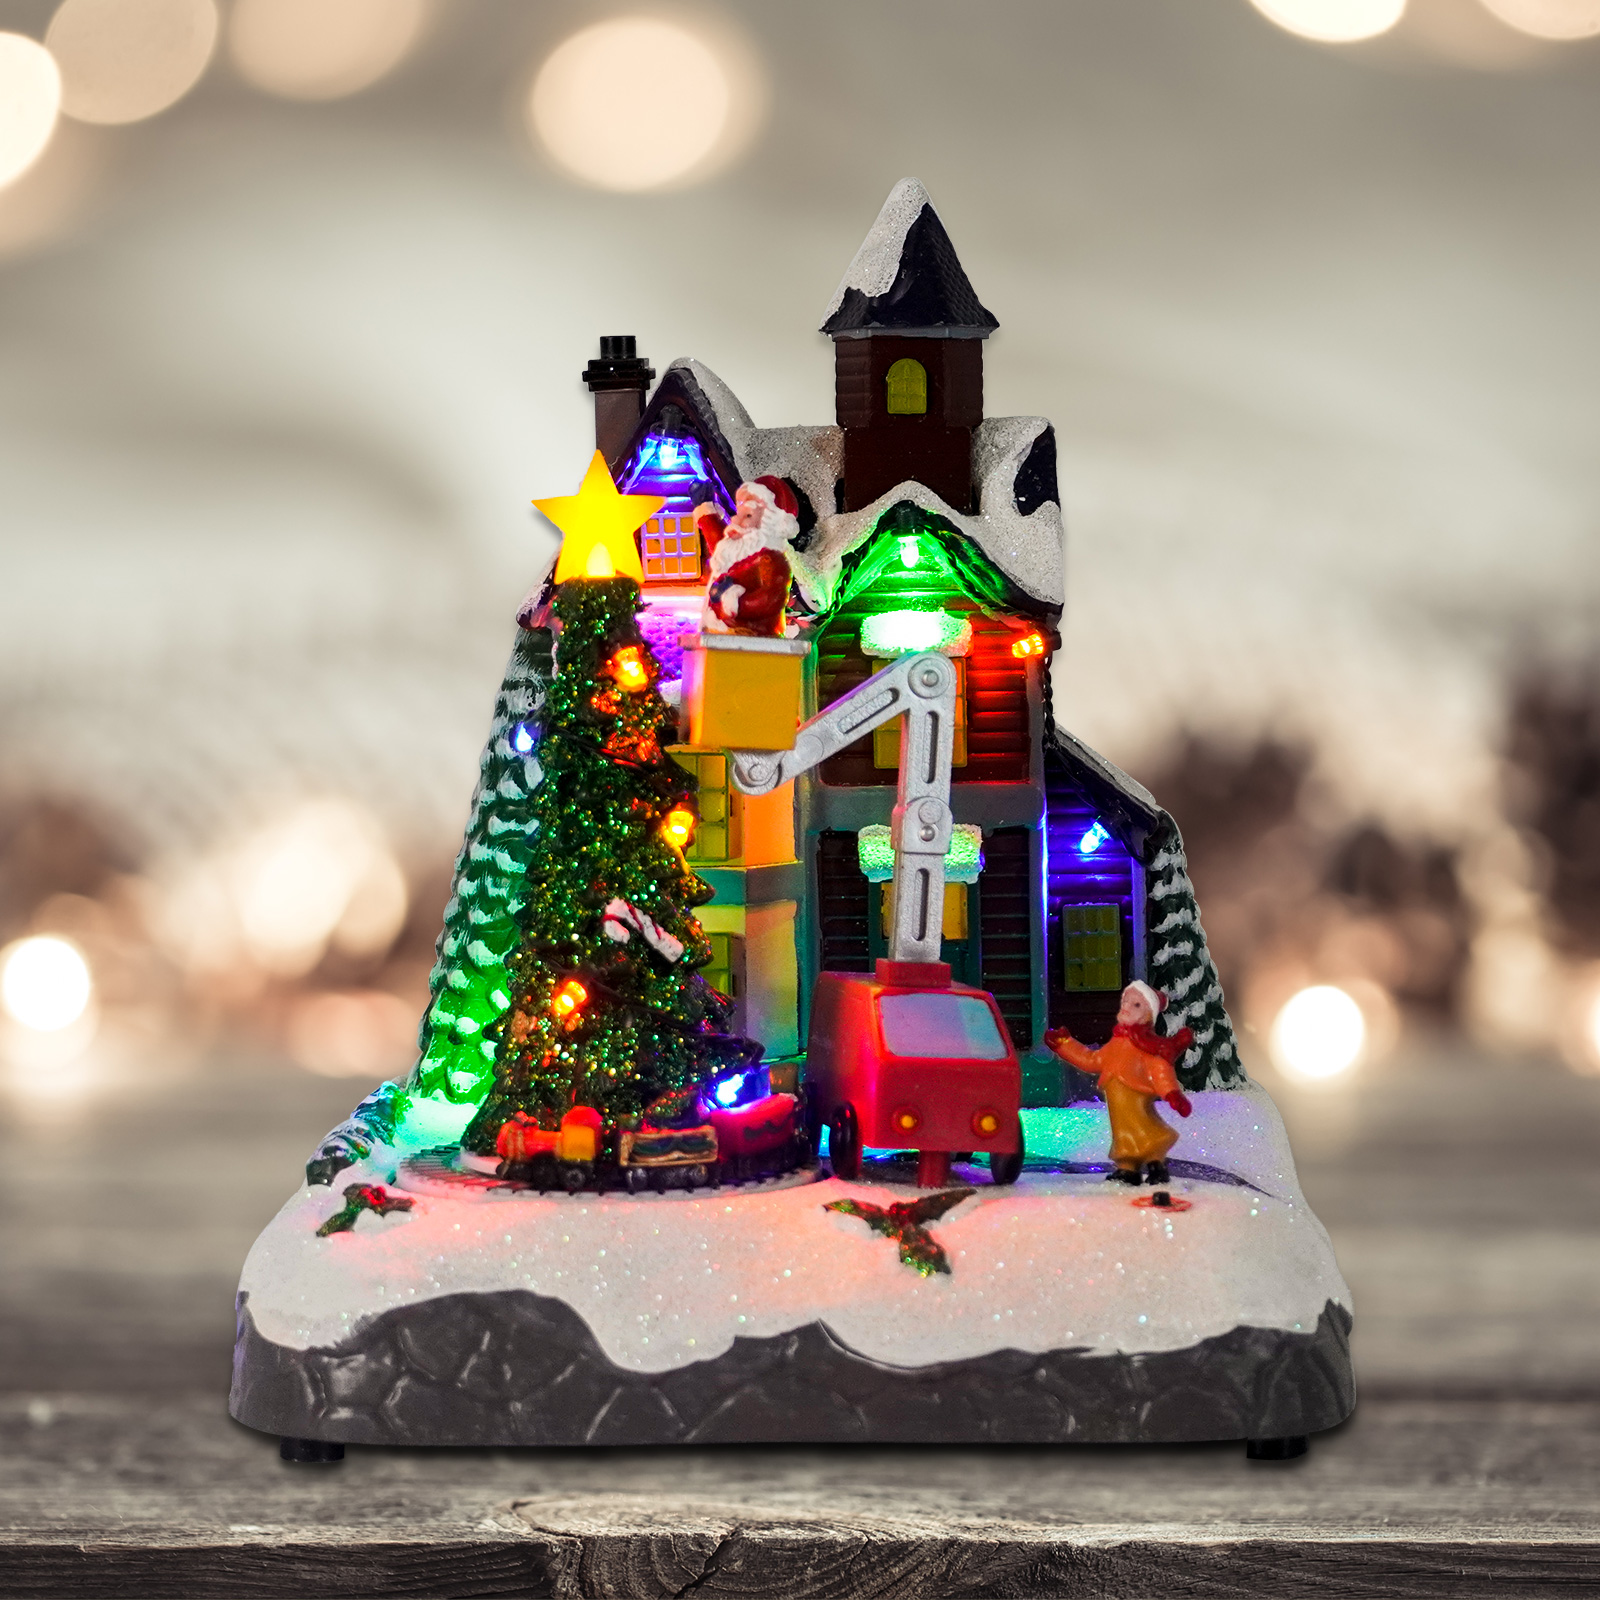 Melody 2021 New Arrival Christmas House Village LED Lights Decoration/Holiday Presents/Indoor Decoration